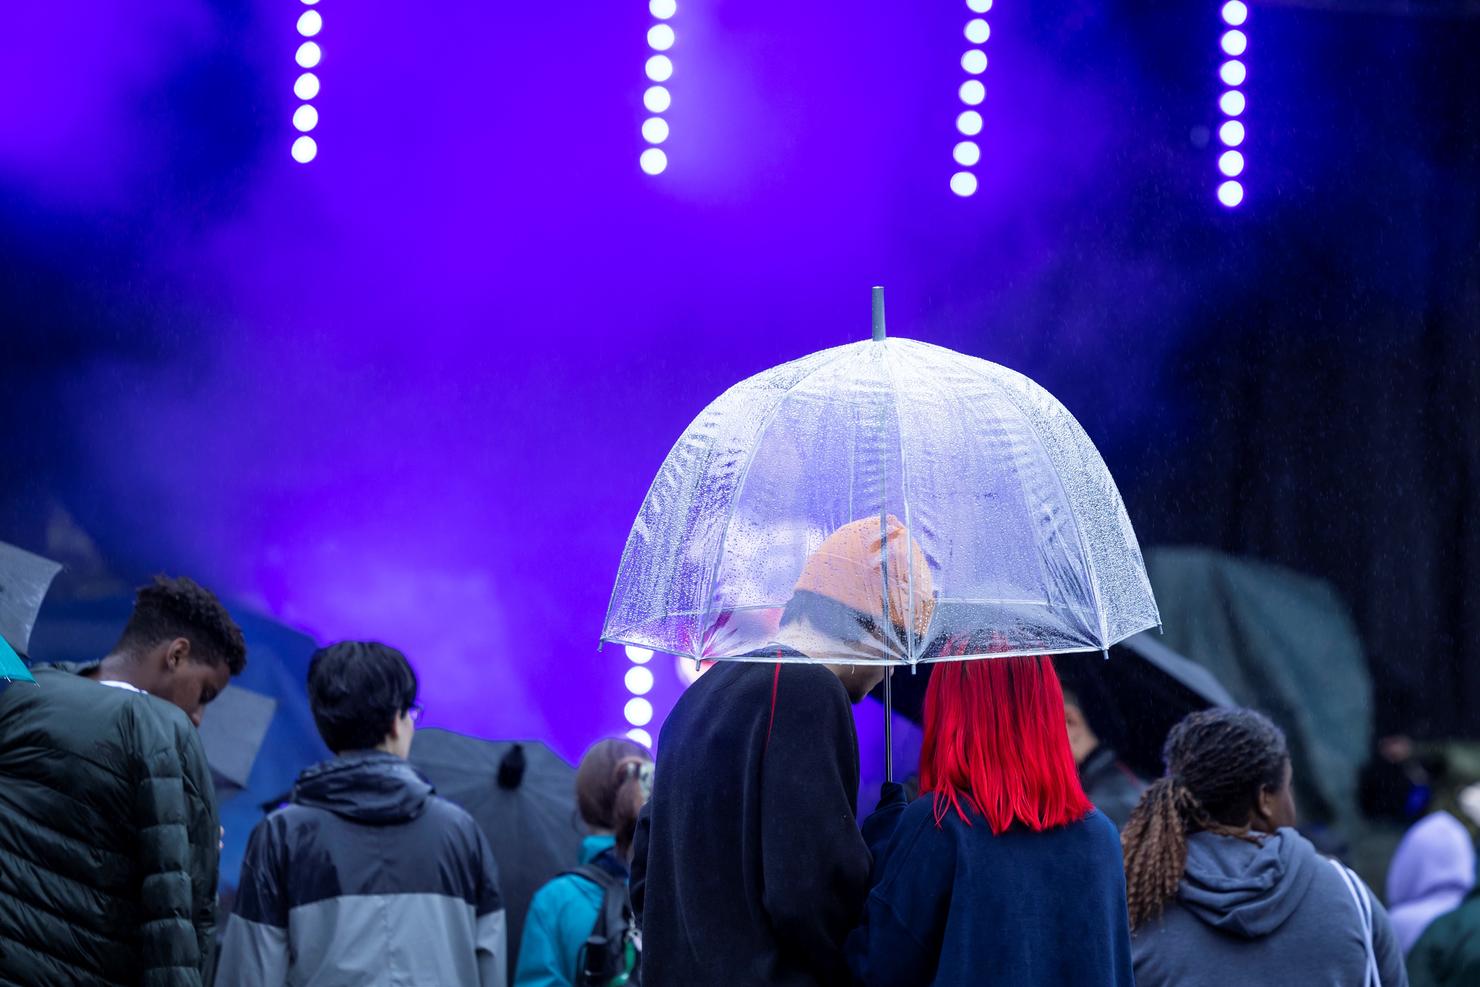 Two people stand close together under a transparent umbrella within the crowd, in front of the performance stage at Mason Day. The rain is coming down.